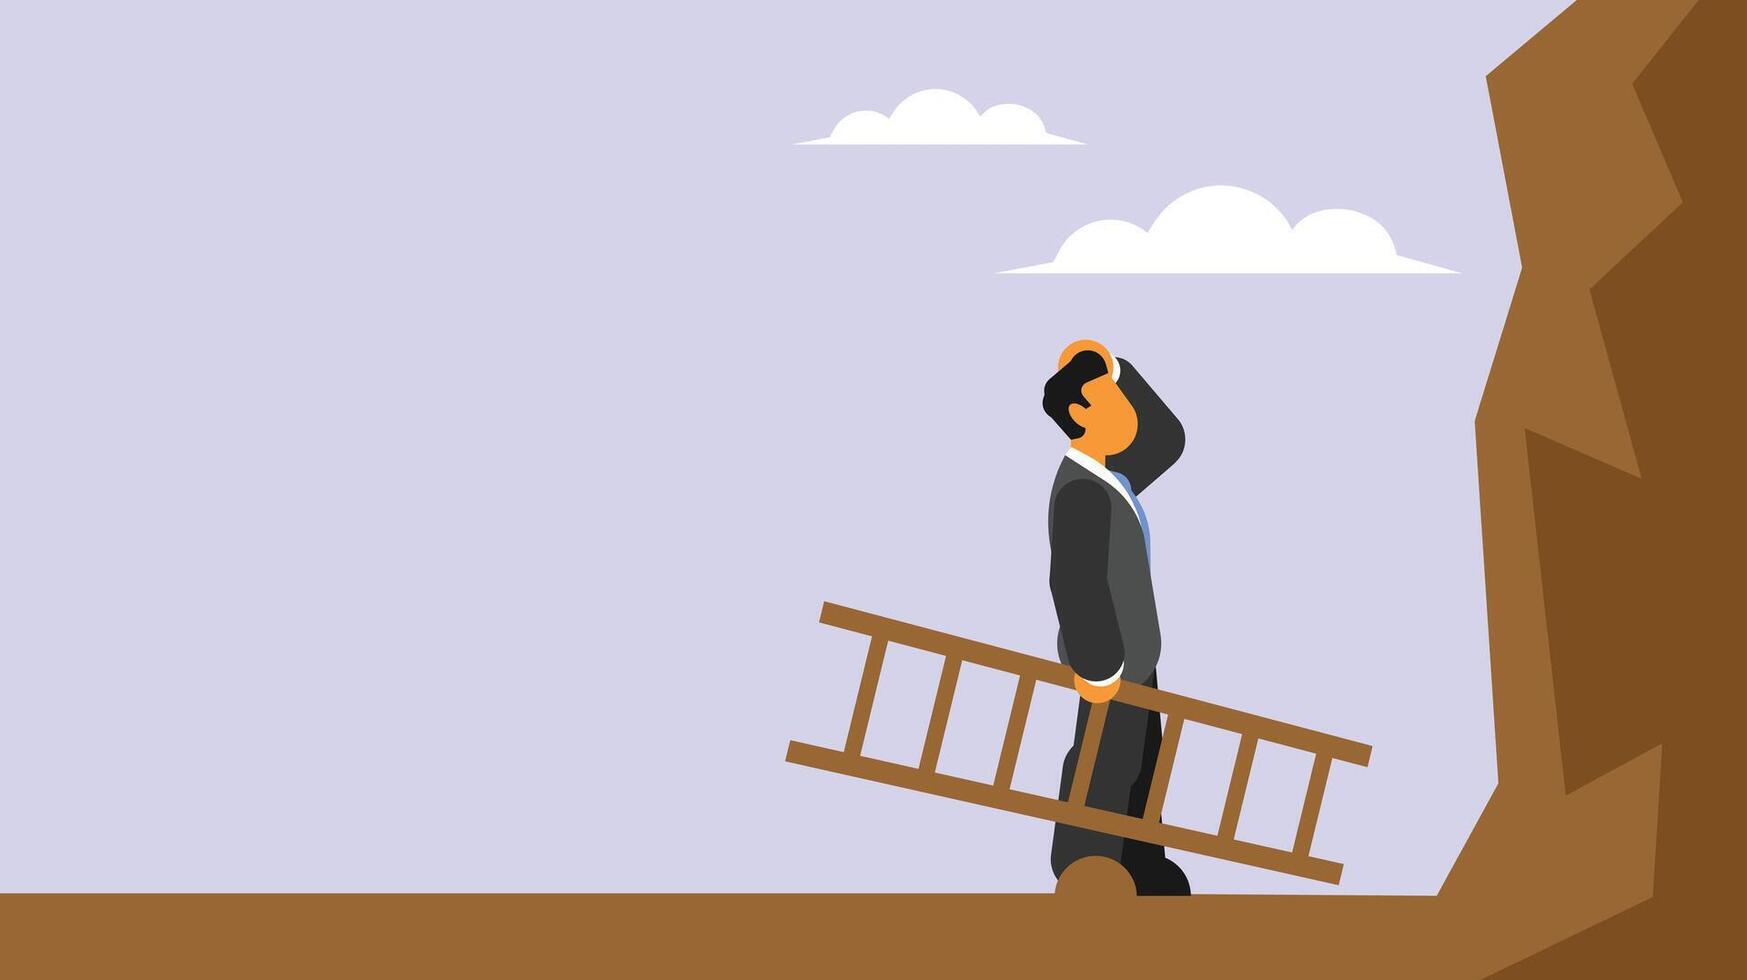 business man thinking to use ladder to go up vector illustration